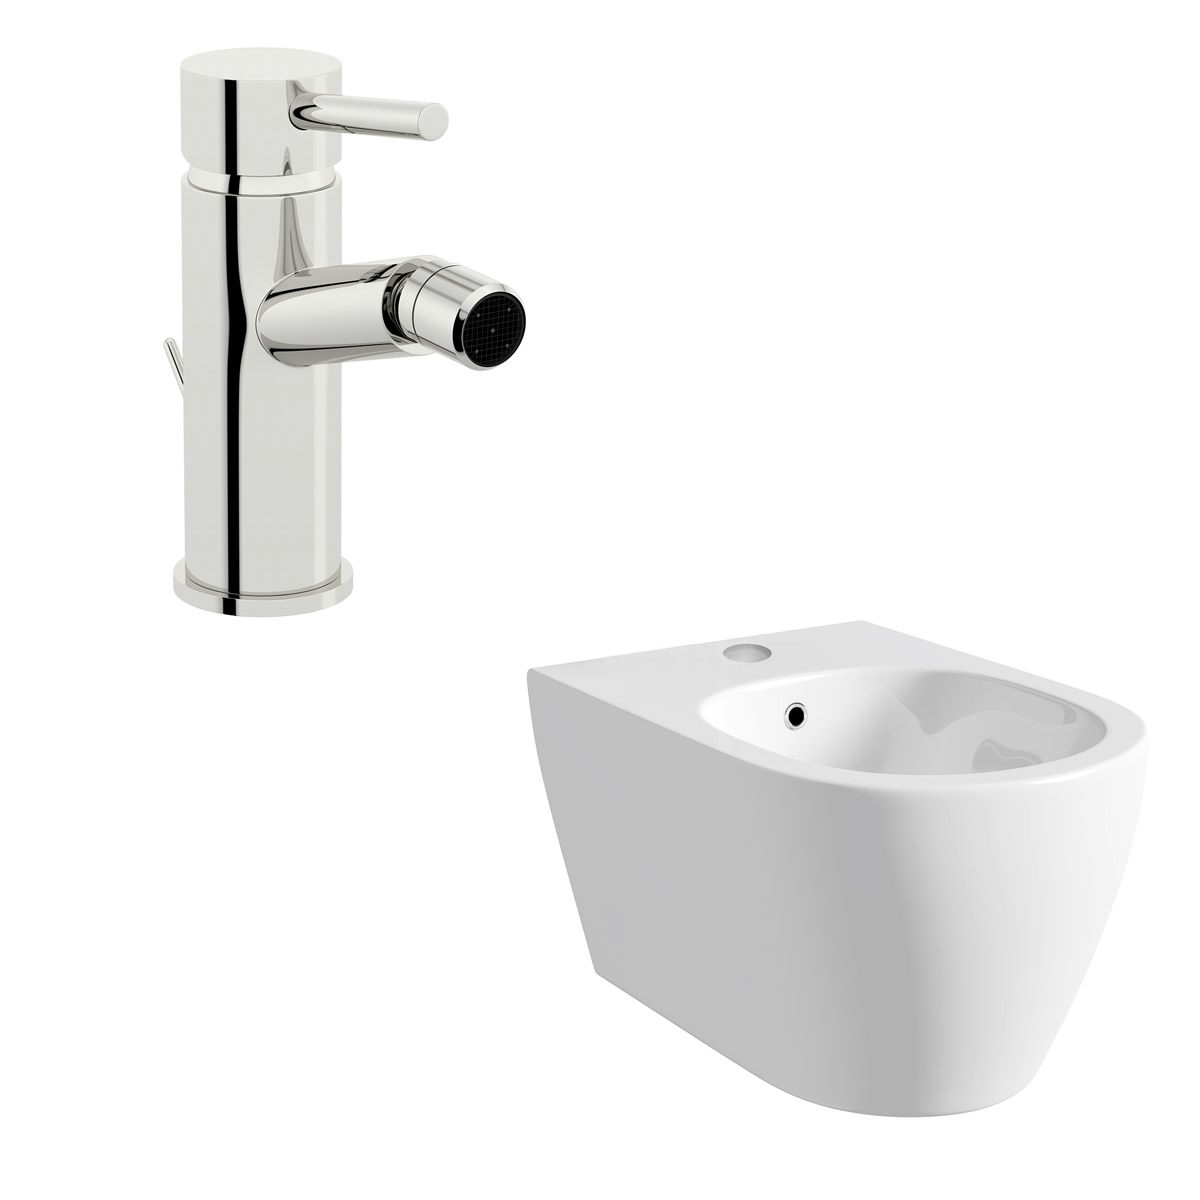 Mode Opal wall hung bidet with tap